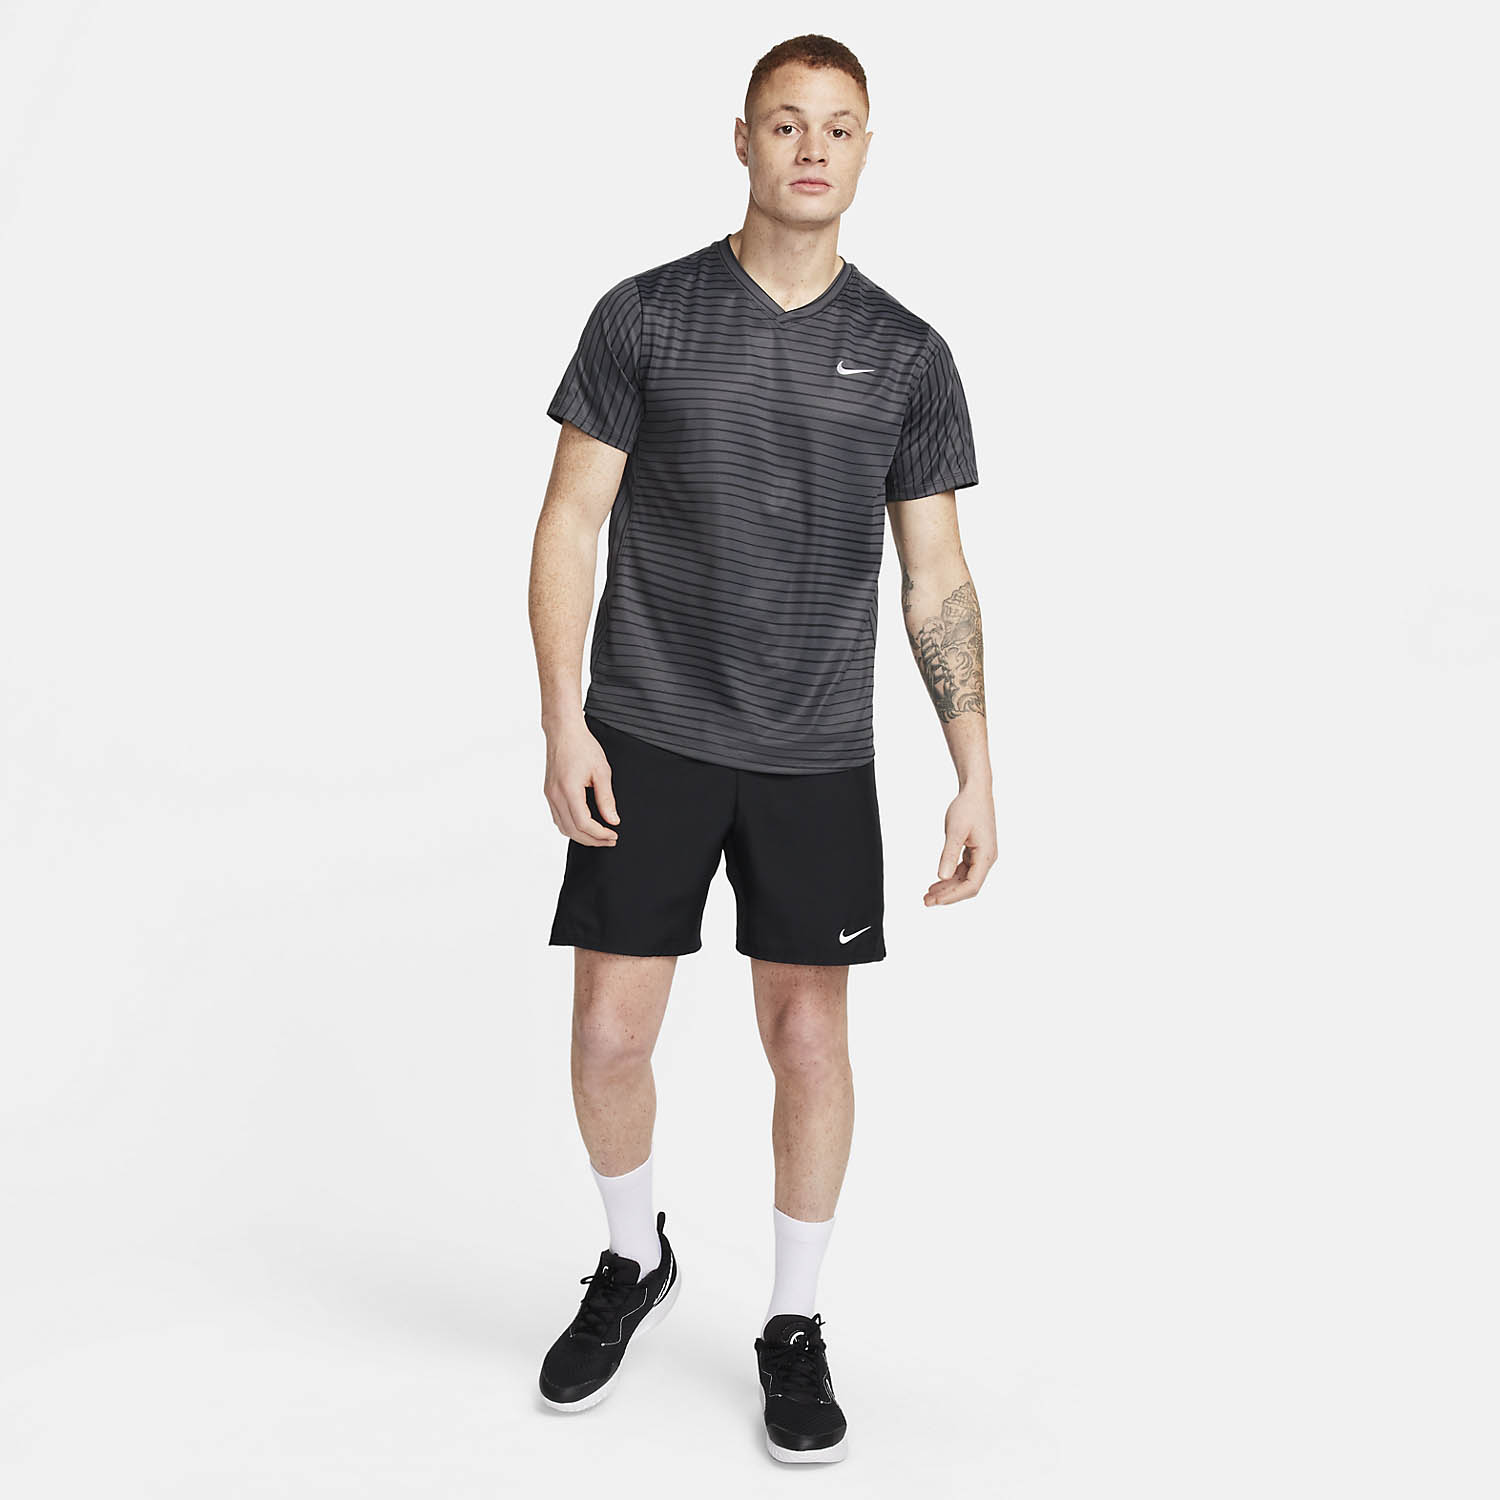 Nike Dri-FIT Victory Novelty T-Shirt - Anthracite/White